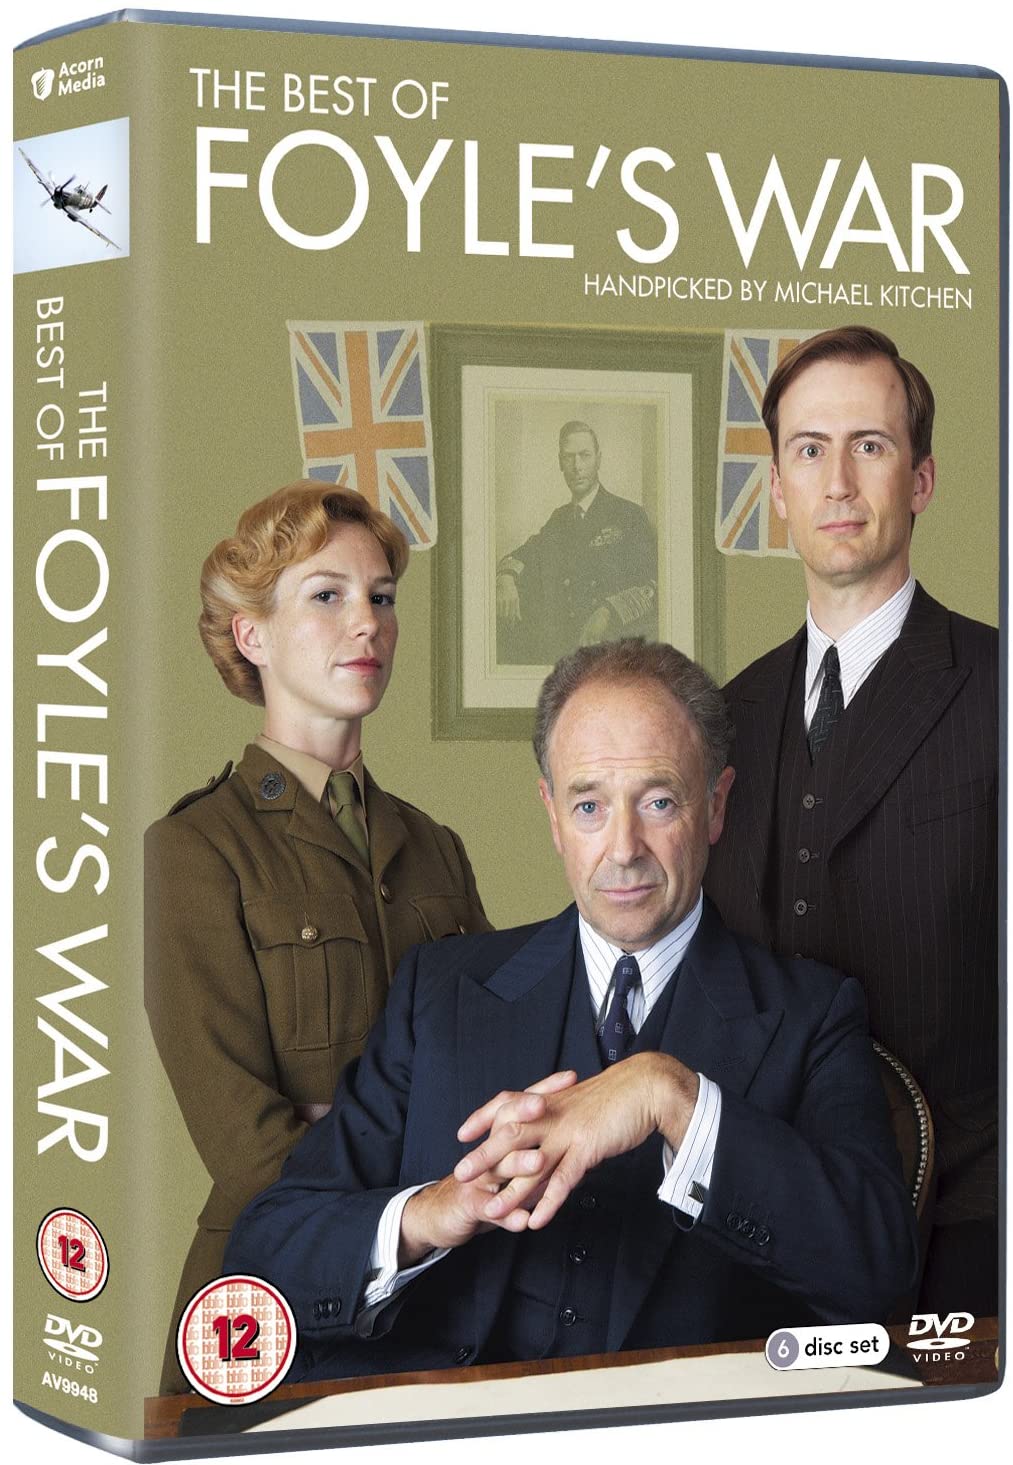 The Best of Foyle's War Collection)